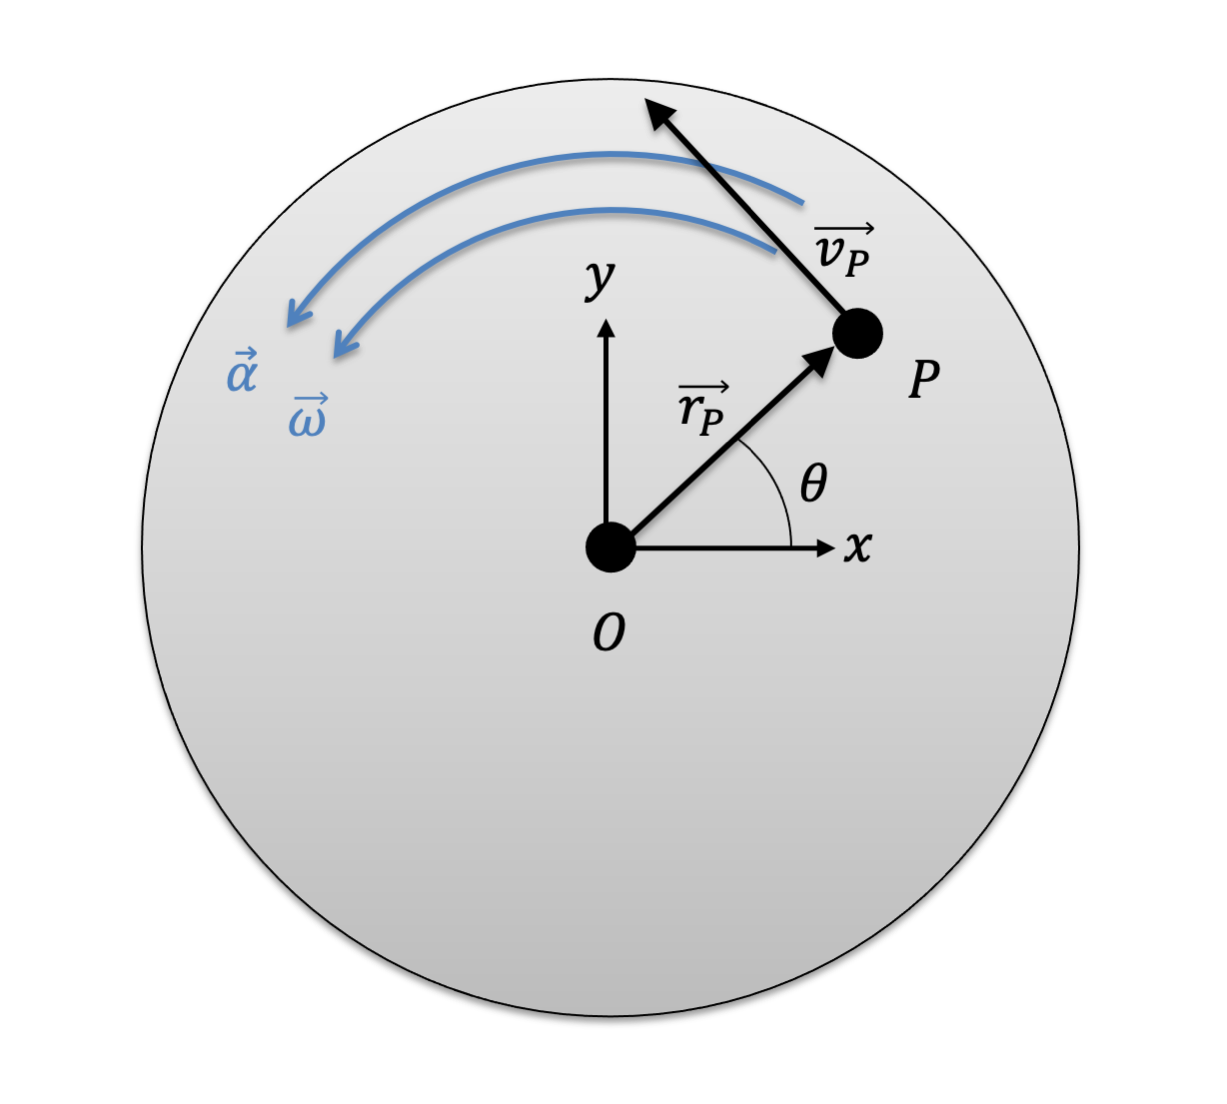 A point on a rotating fixed axis